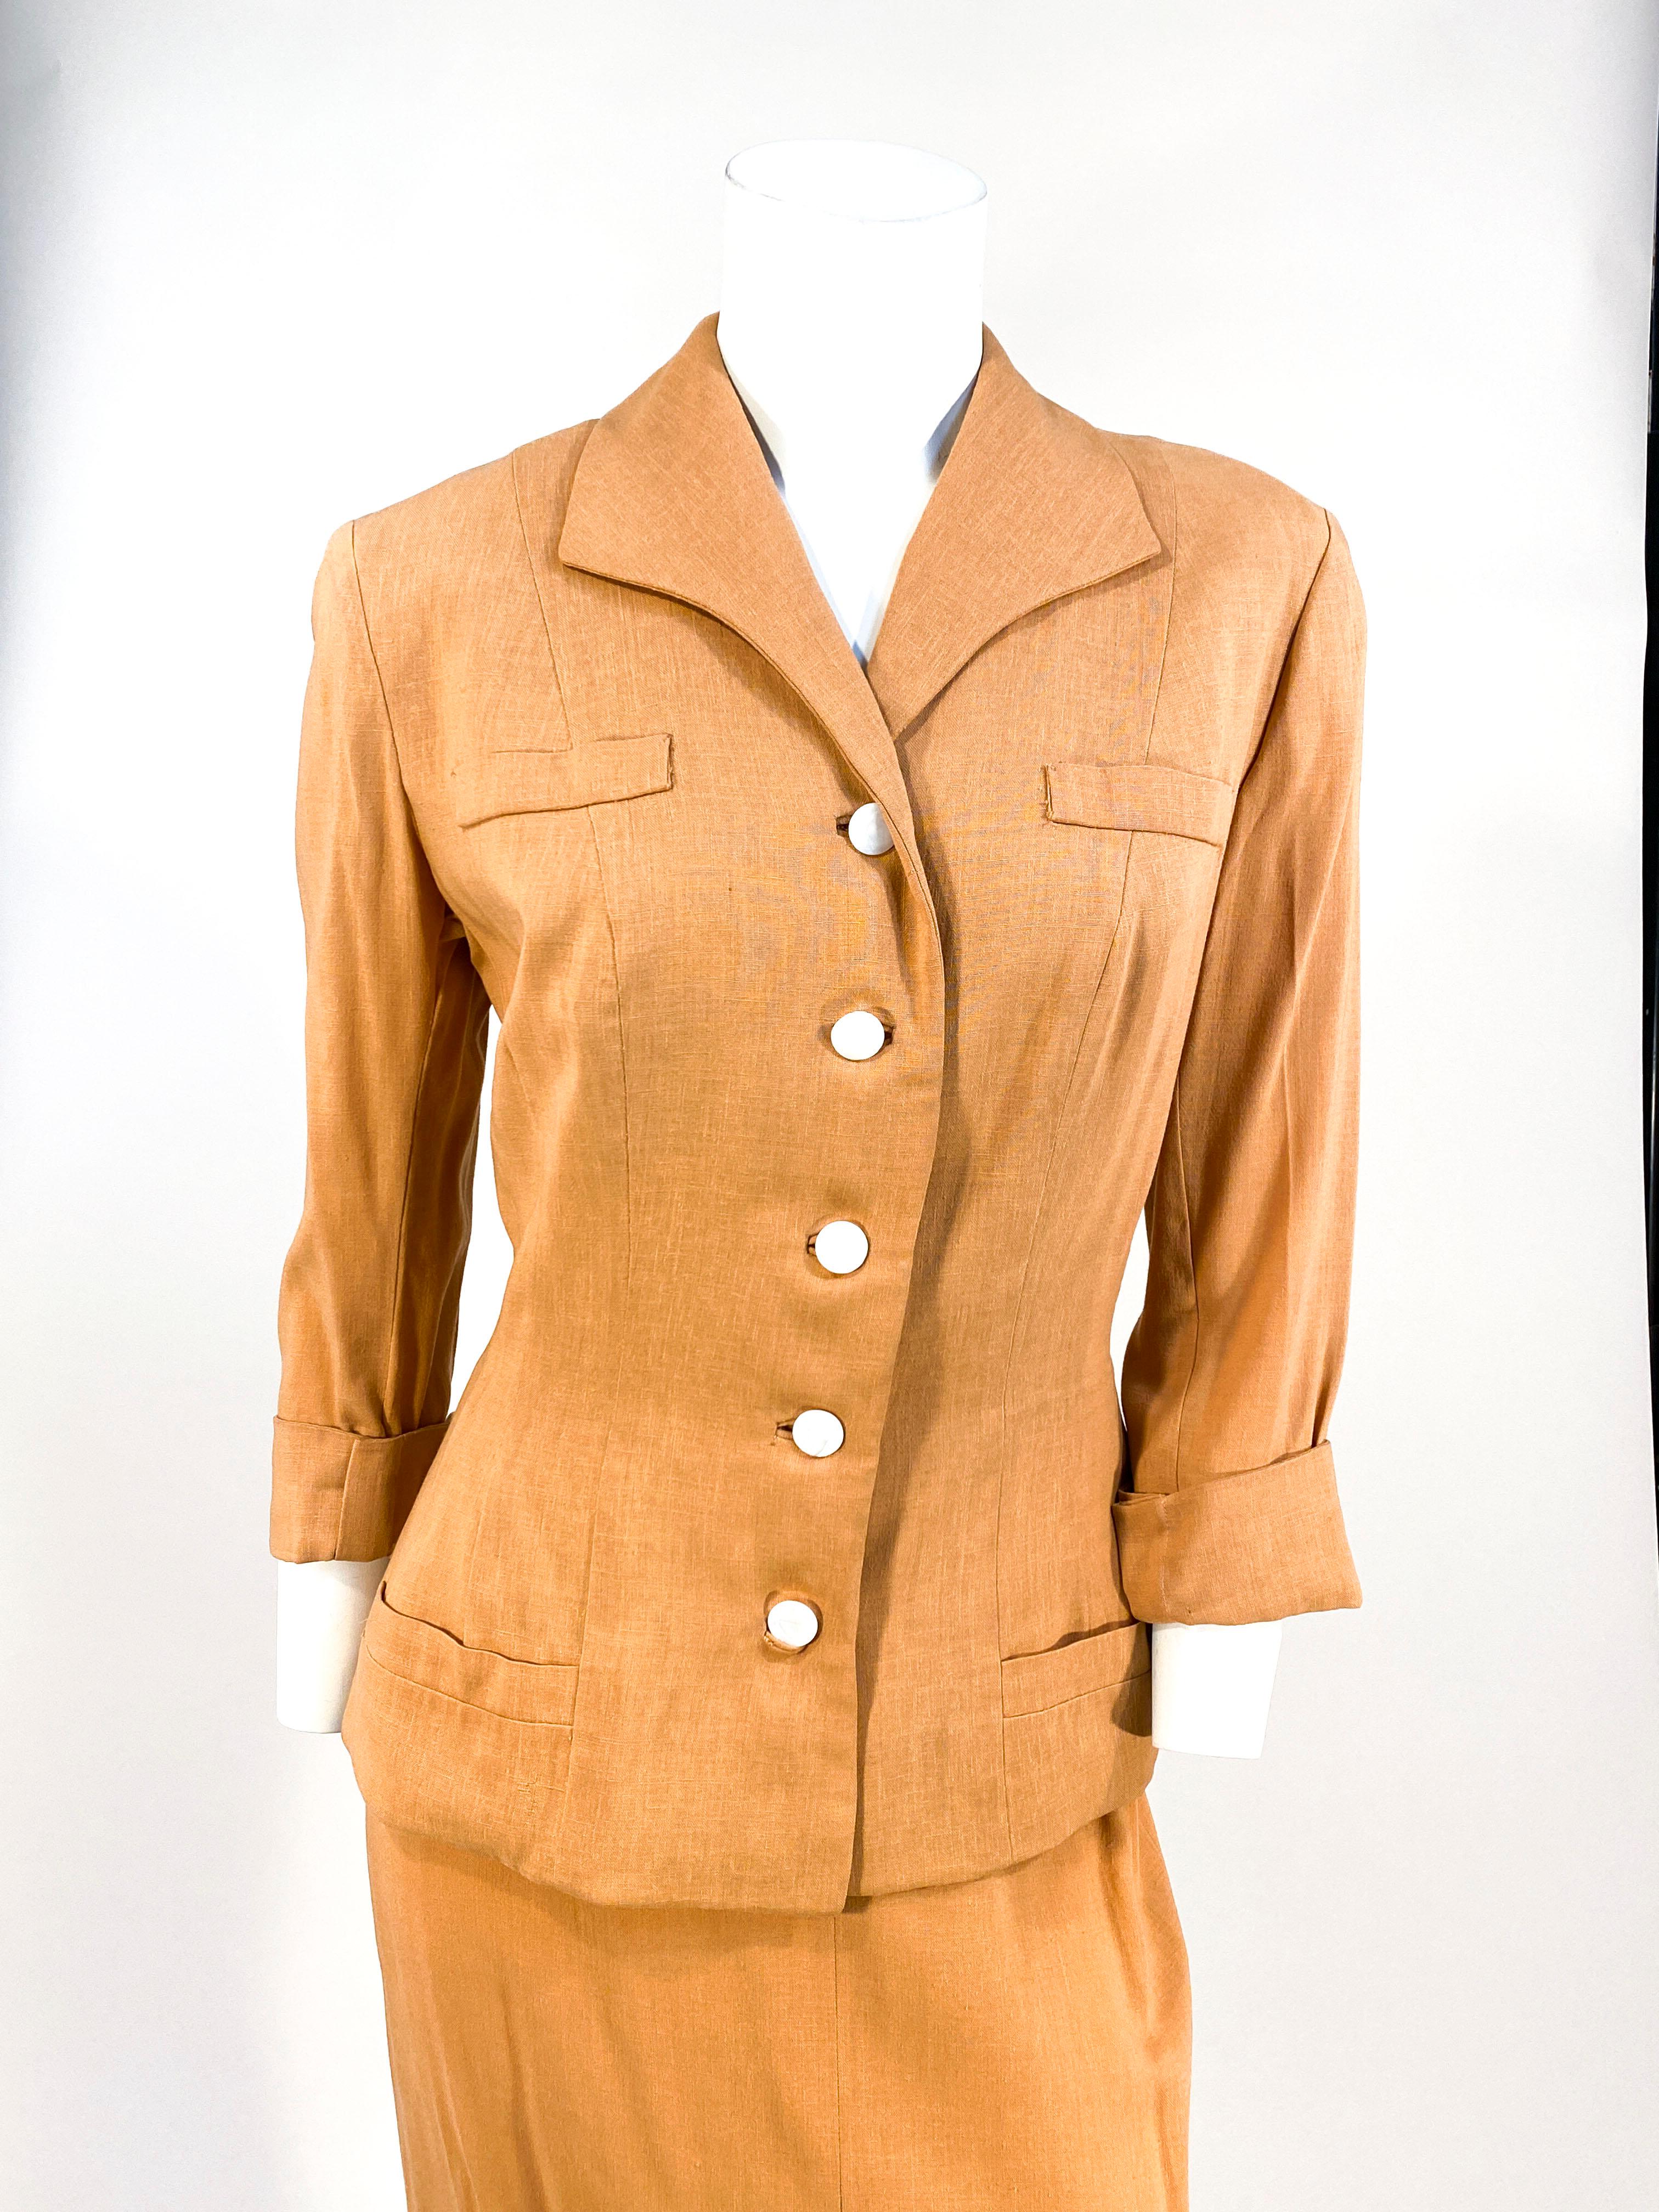 Early 1950s muted apricot colored linen suit with three-quarter length sleeves finished with a fold. The face of the jacket hat two faux pockets at the top, two shallow pockets at the bottom, and a row of large mother of pearl buttons with inset